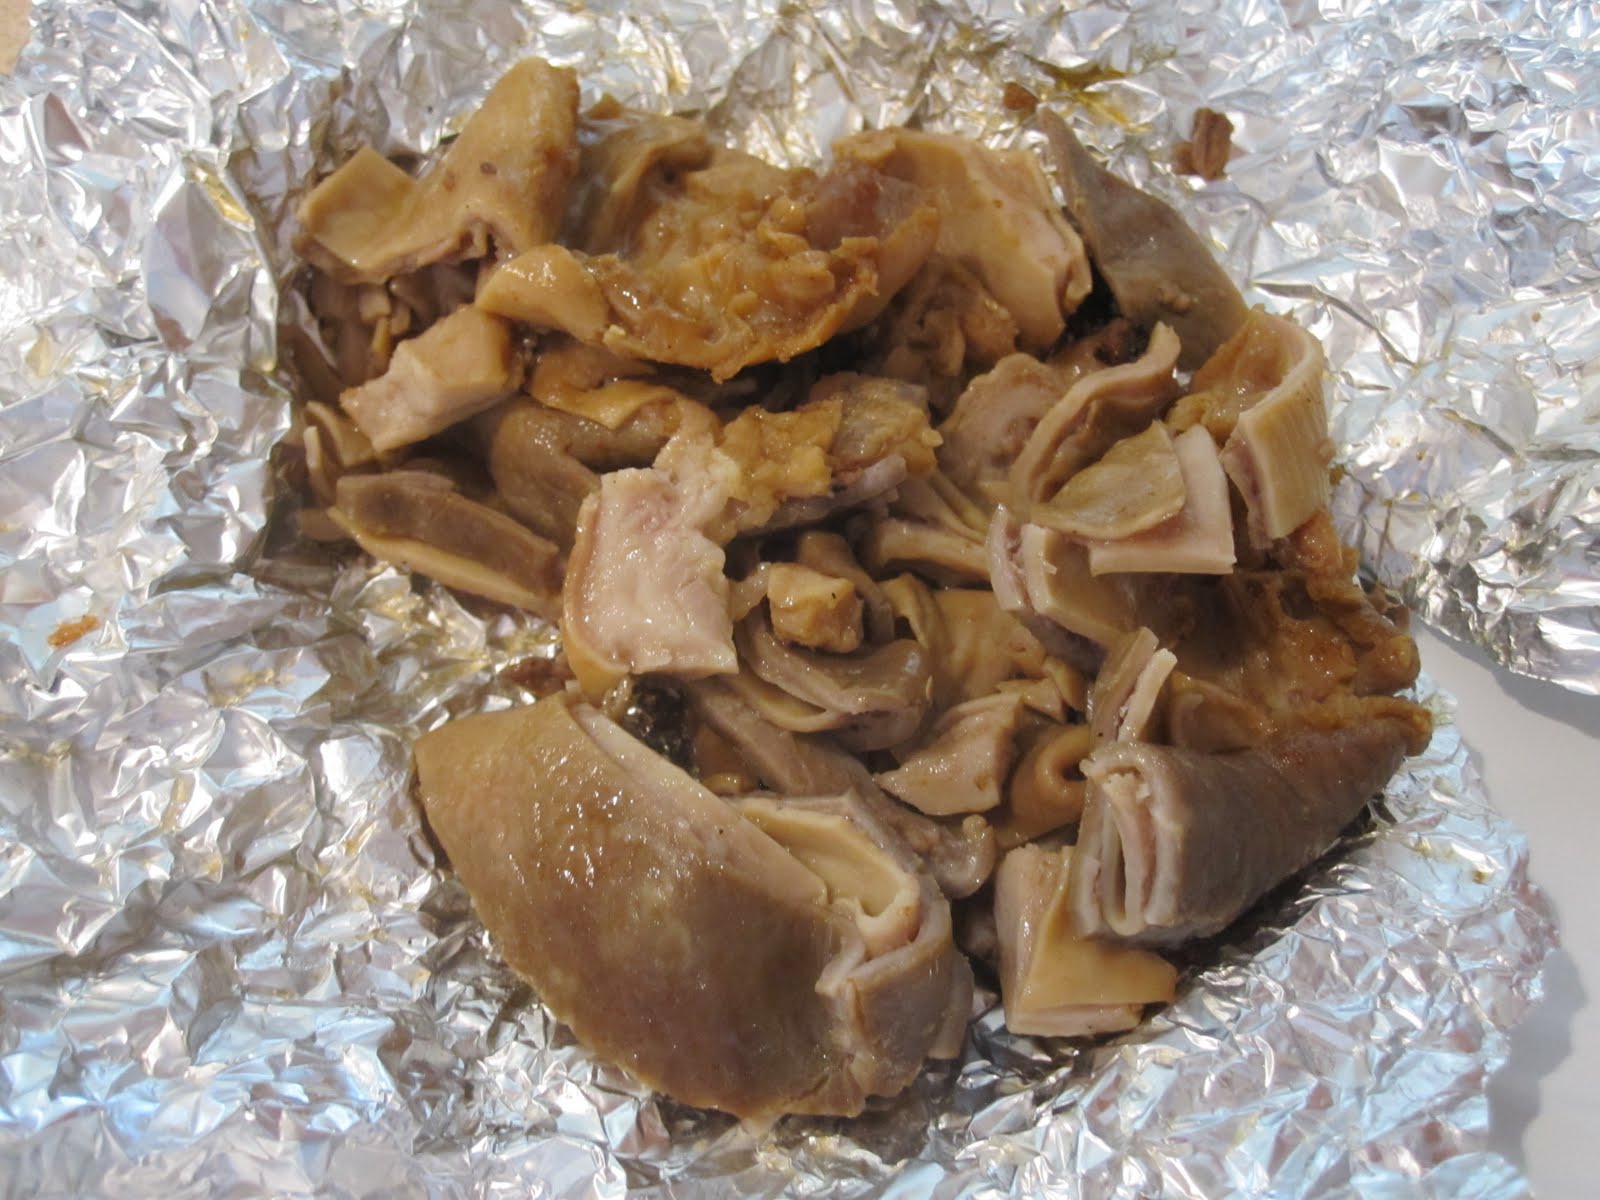 Cannundrums: Pig Stomach, Hog Maw or Buche